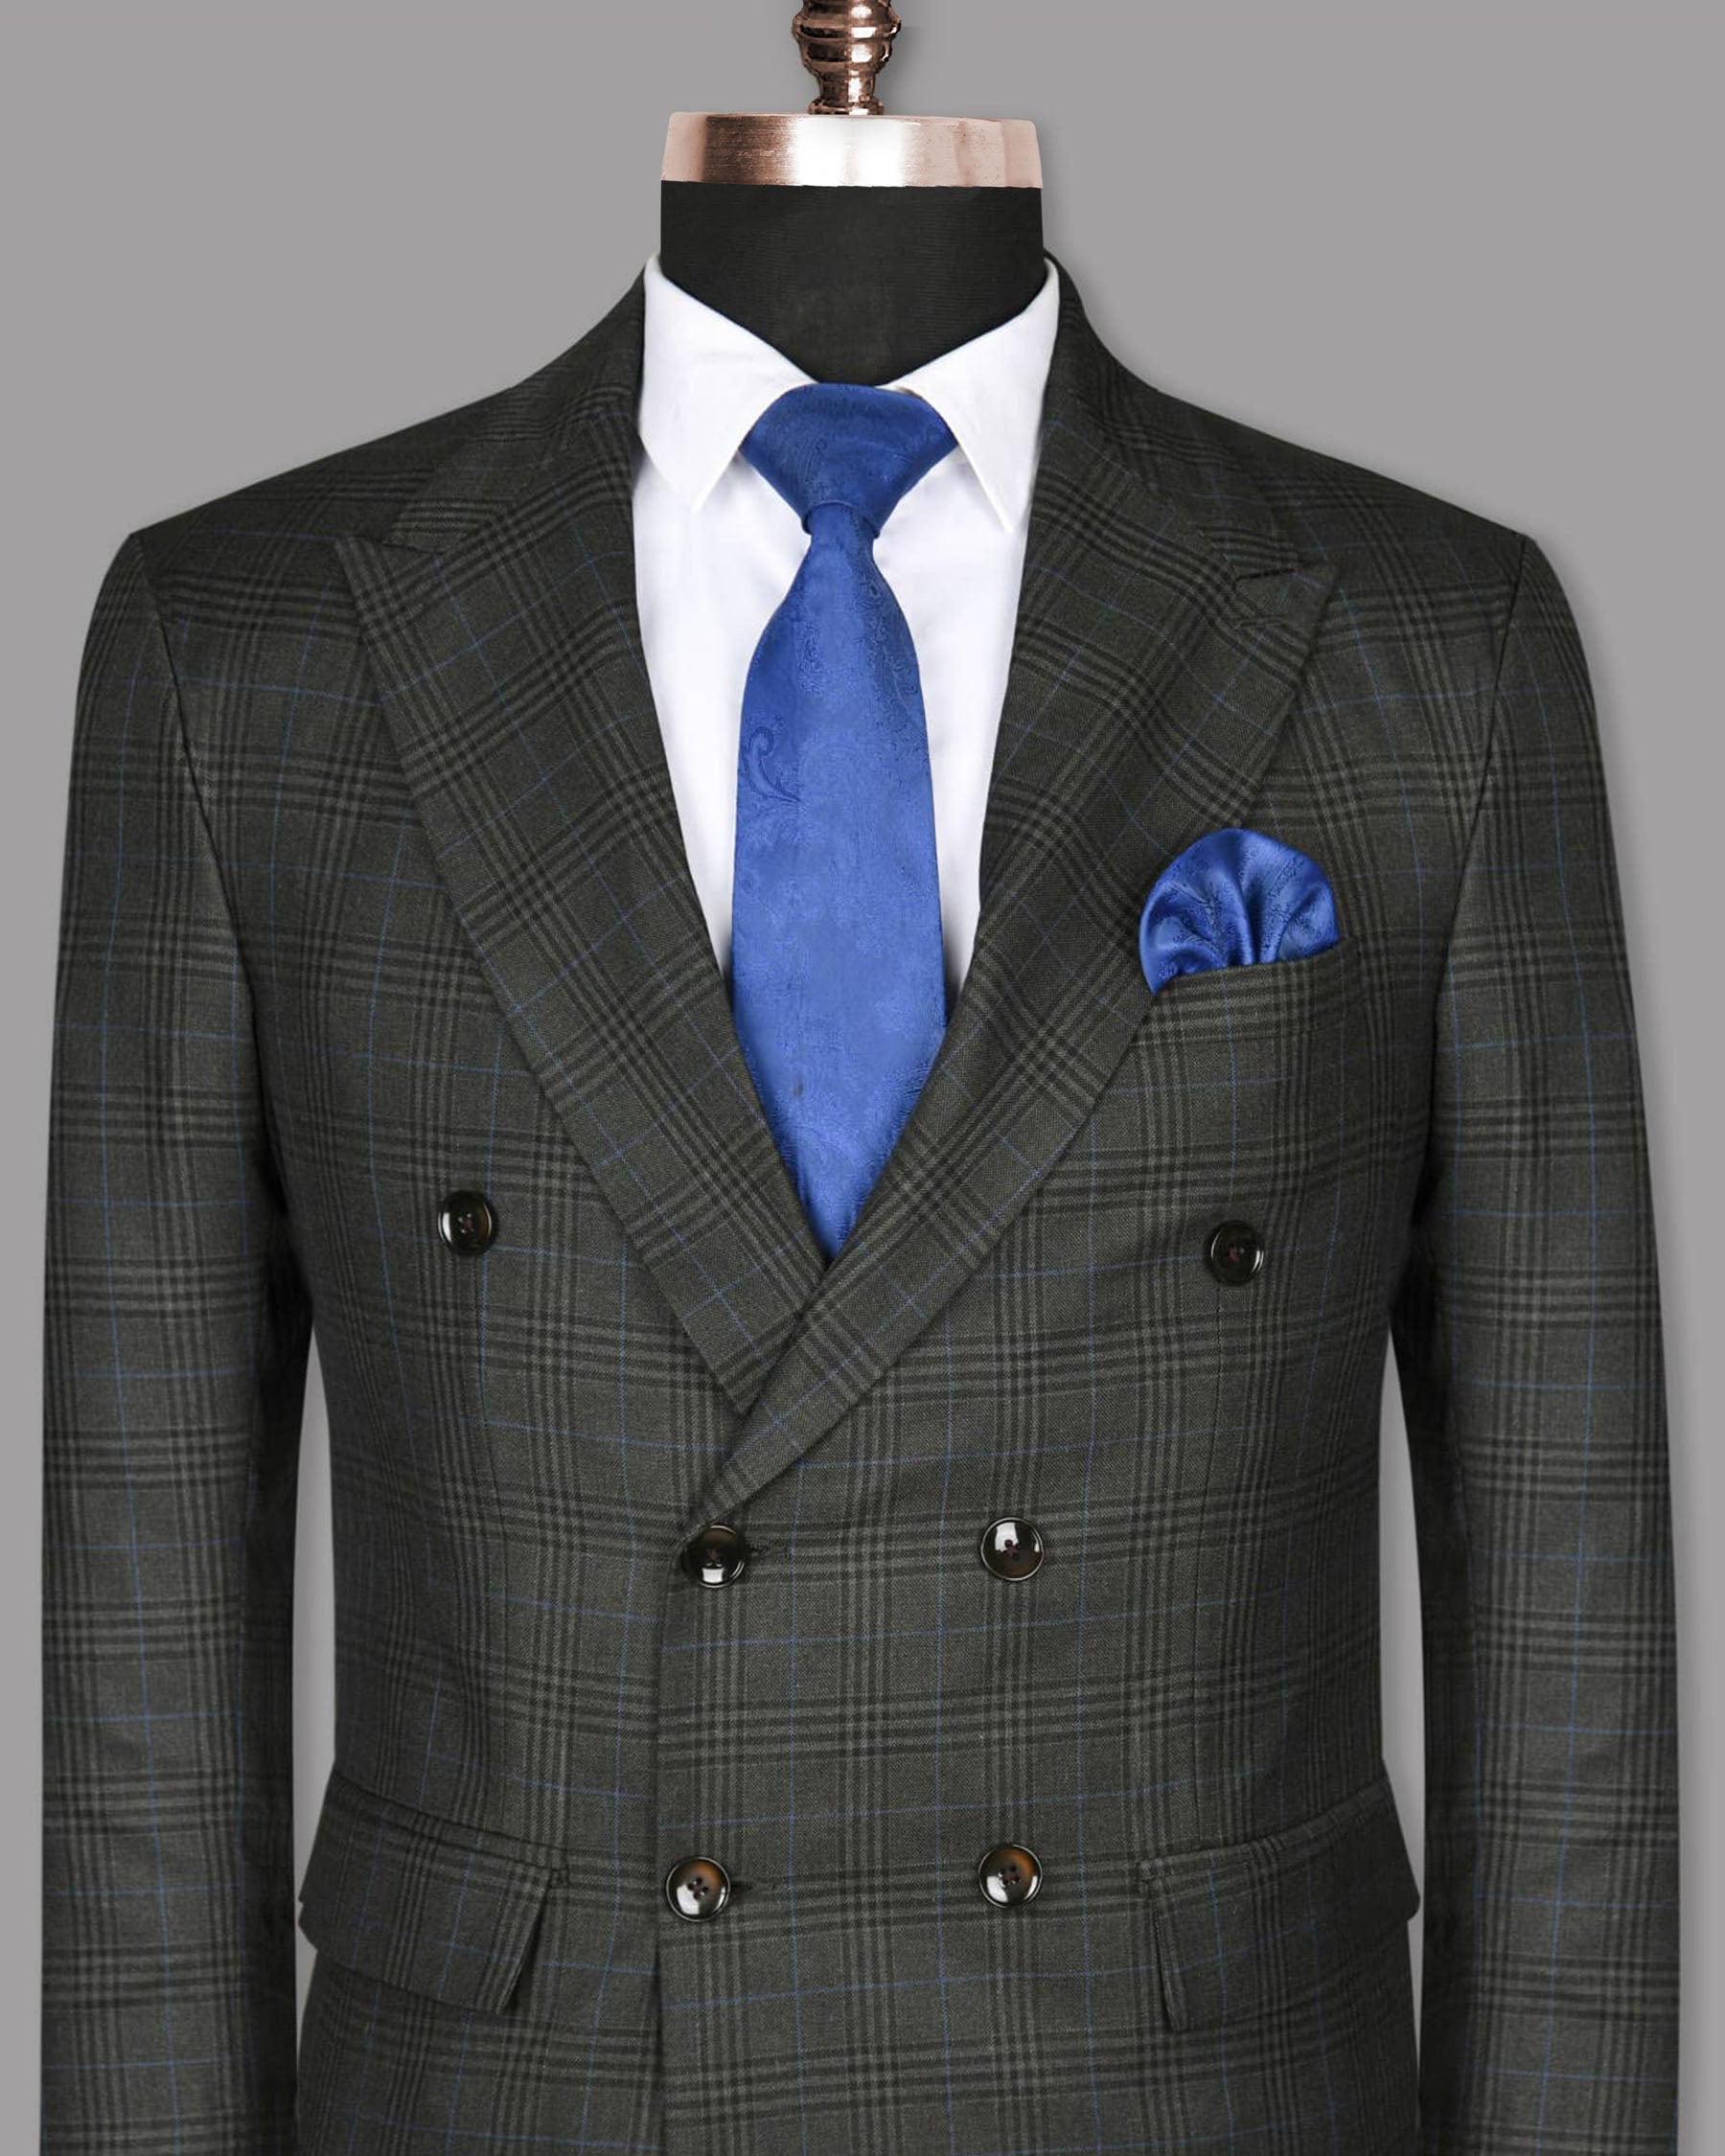 Charcoal Plaid Wool Blend Double Breasted Blazer BL767DB-36, BL767DB-38, BL767DB-40, BL767DB-46, BL767DB-52, BL767DB-56, BL767DB-44, BL767DB-58, BL767DB-54, BL767DB-60, BL767DB-48, BL767DB-50, BL767DB-42